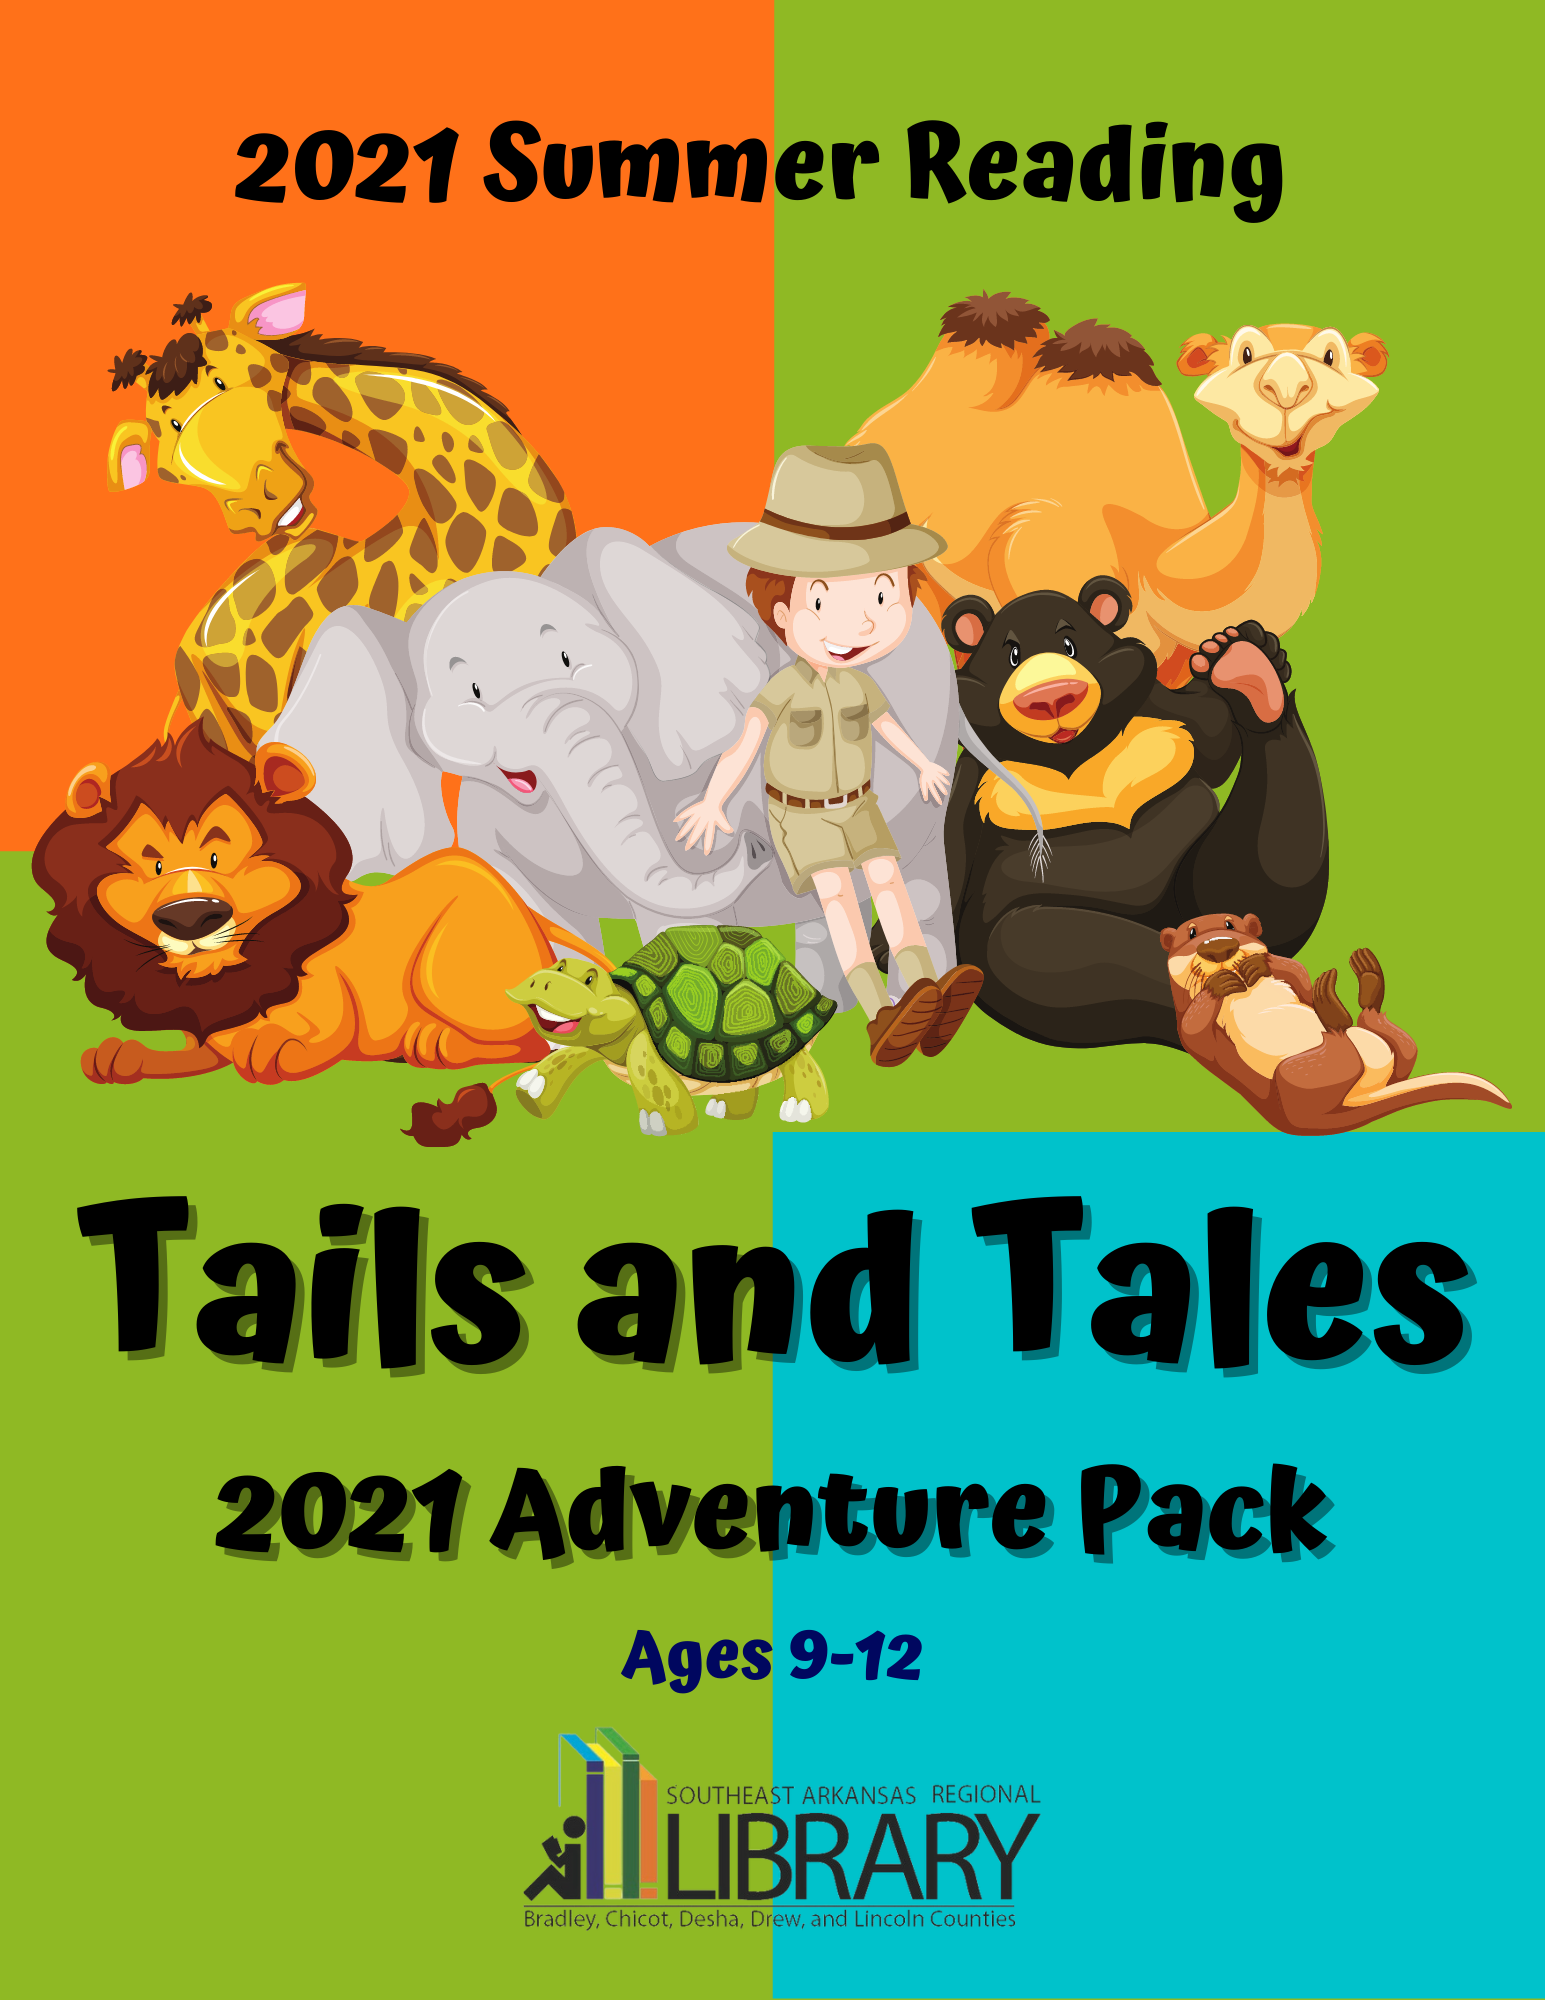 2021 Summer Reading Tails and Tales Adventure Pack